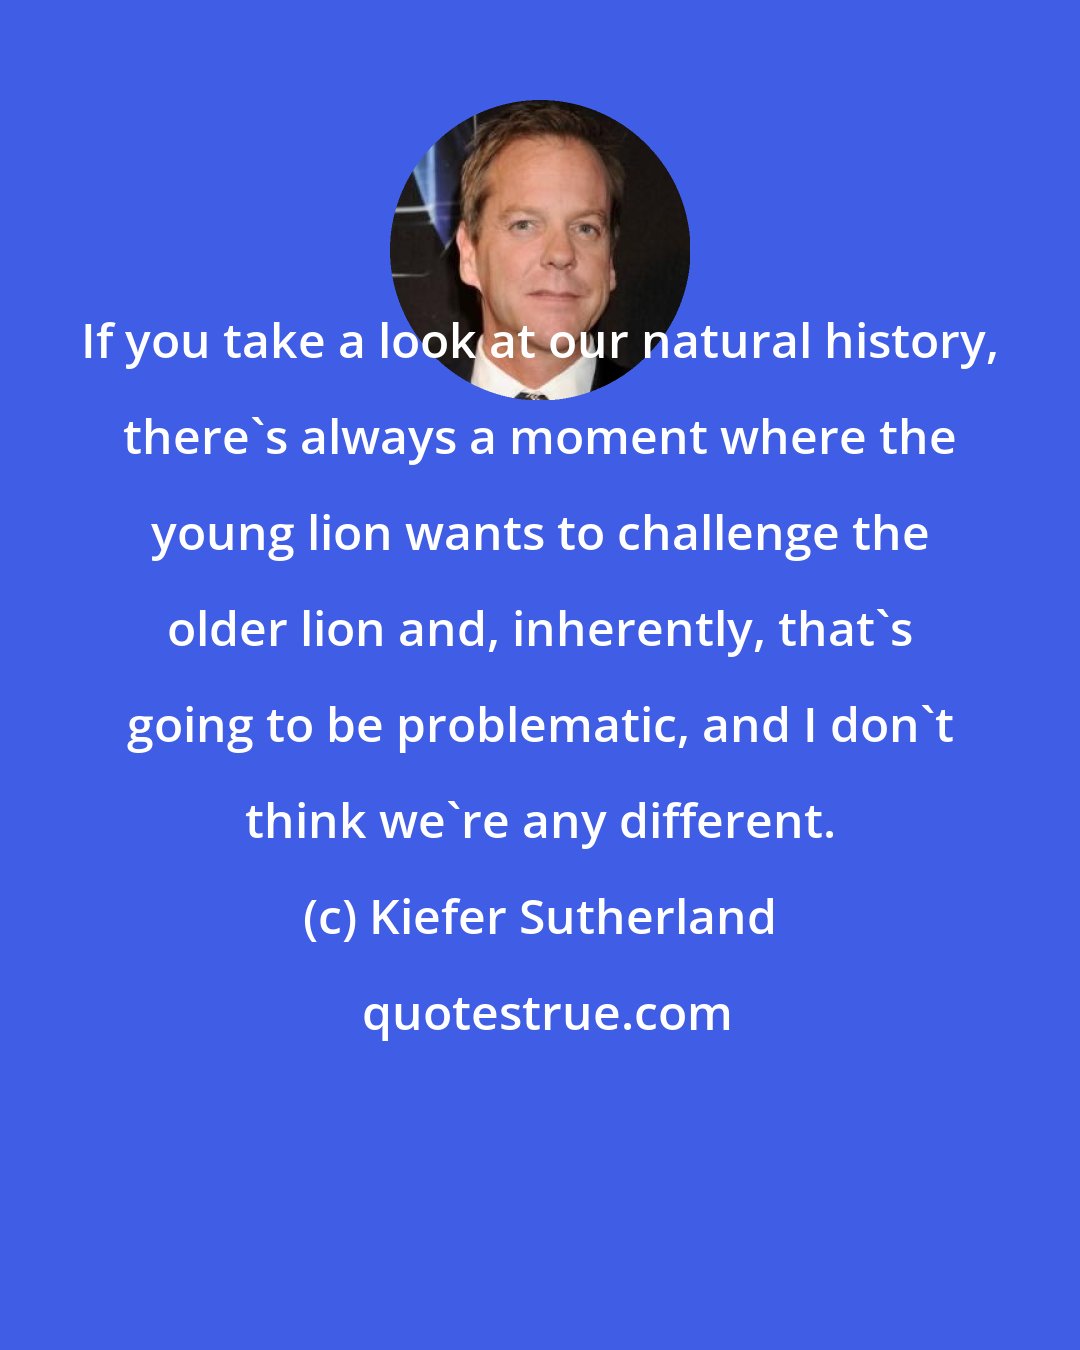 Kiefer Sutherland: If you take a look at our natural history, there's always a moment where the young lion wants to challenge the older lion and, inherently, that's going to be problematic, and I don't think we're any different.